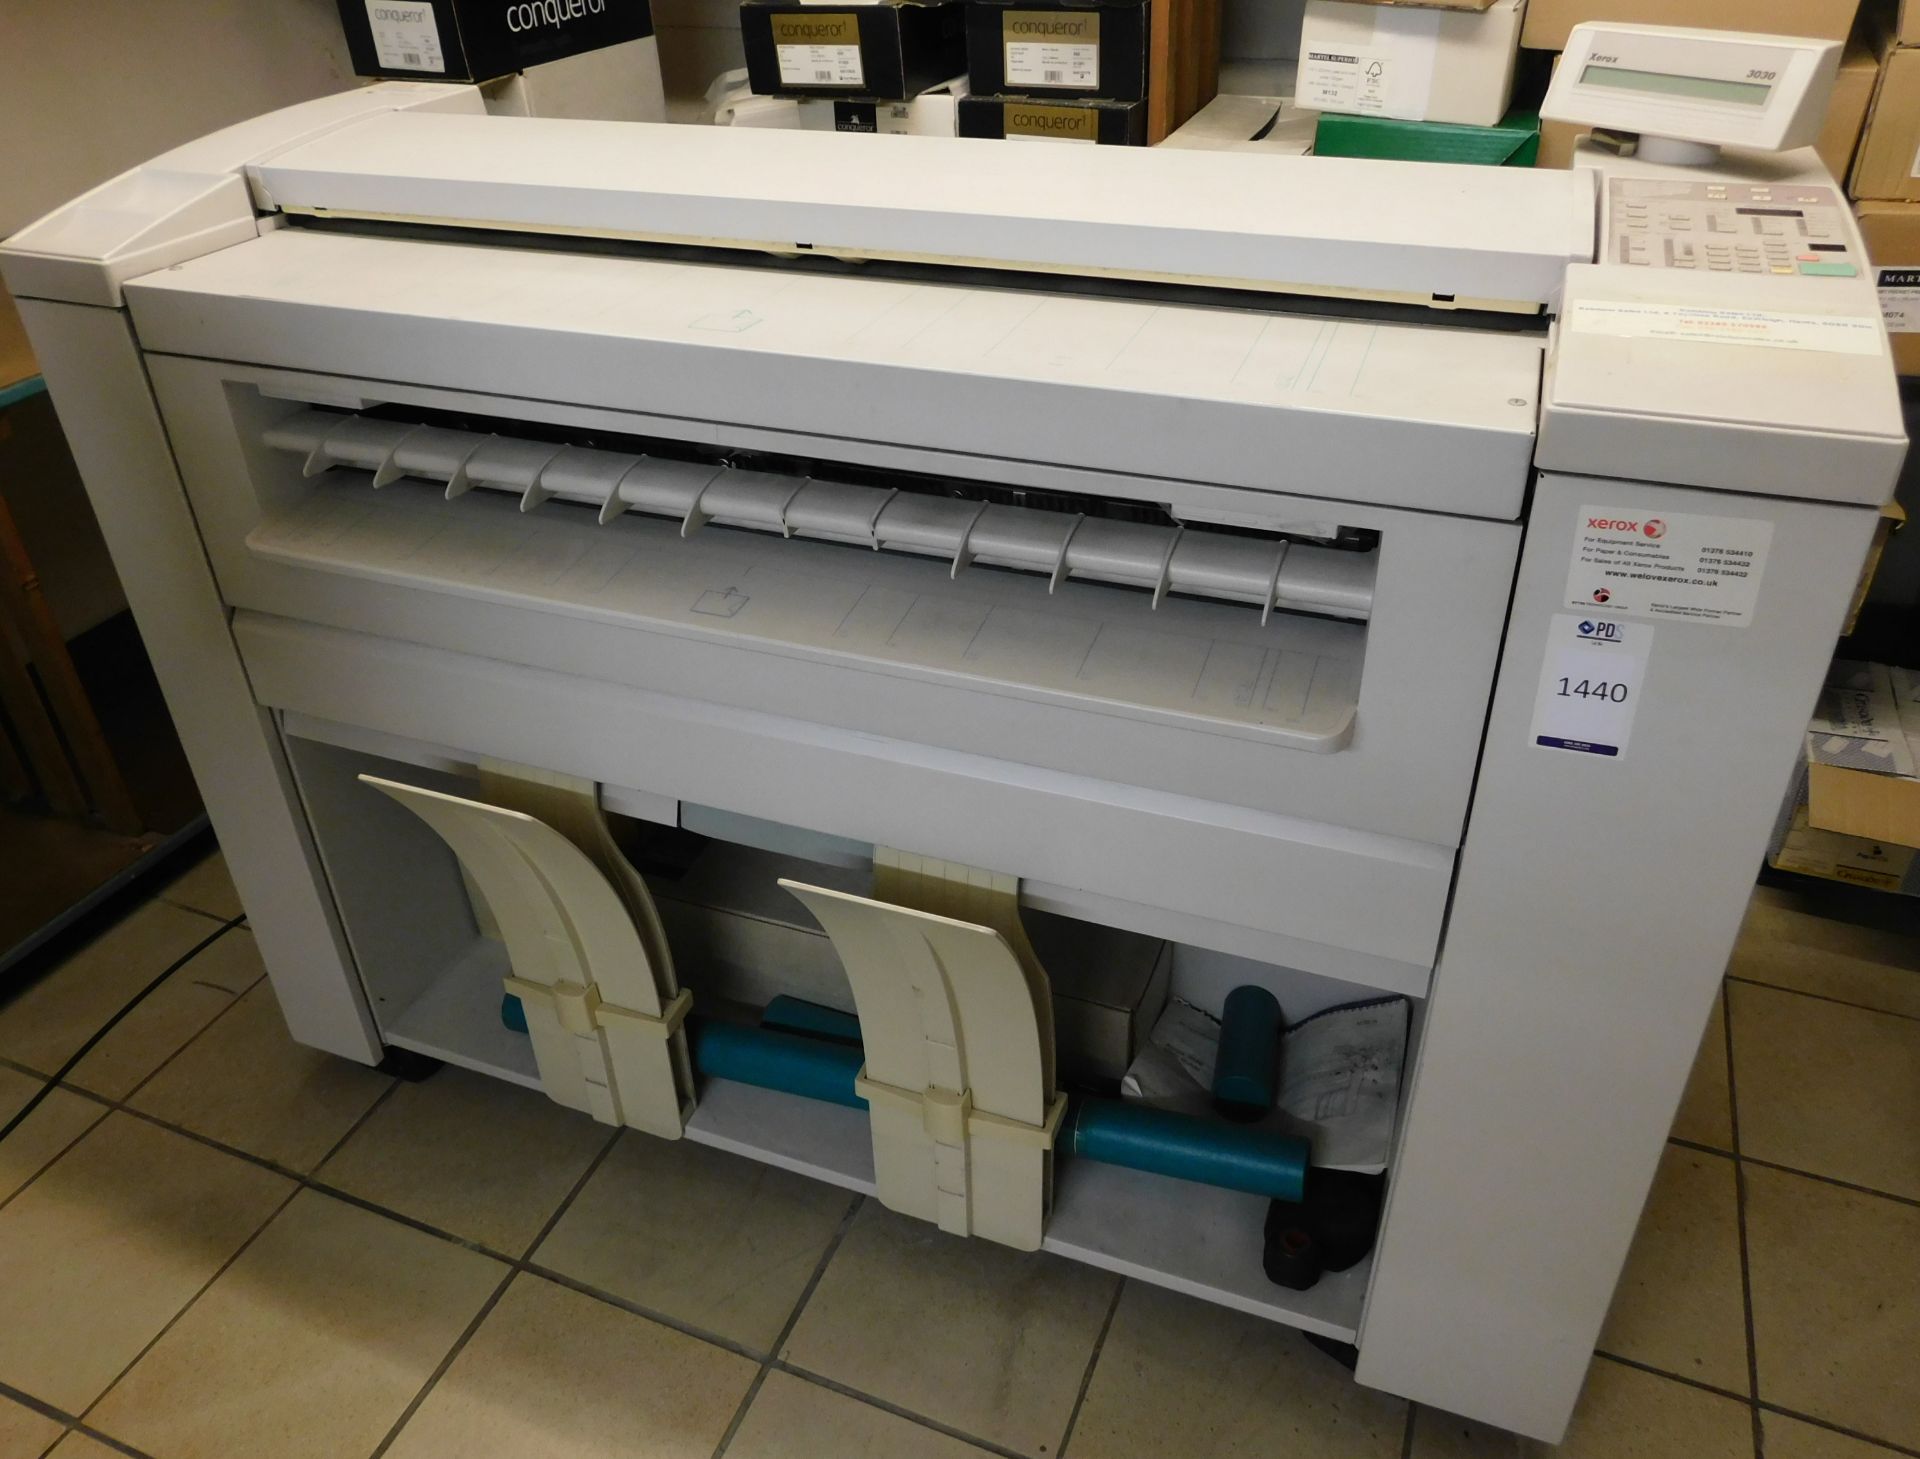 Xerox 3030 Plan Copier (In Basement) (Located Watford - See General Notes for More Details).